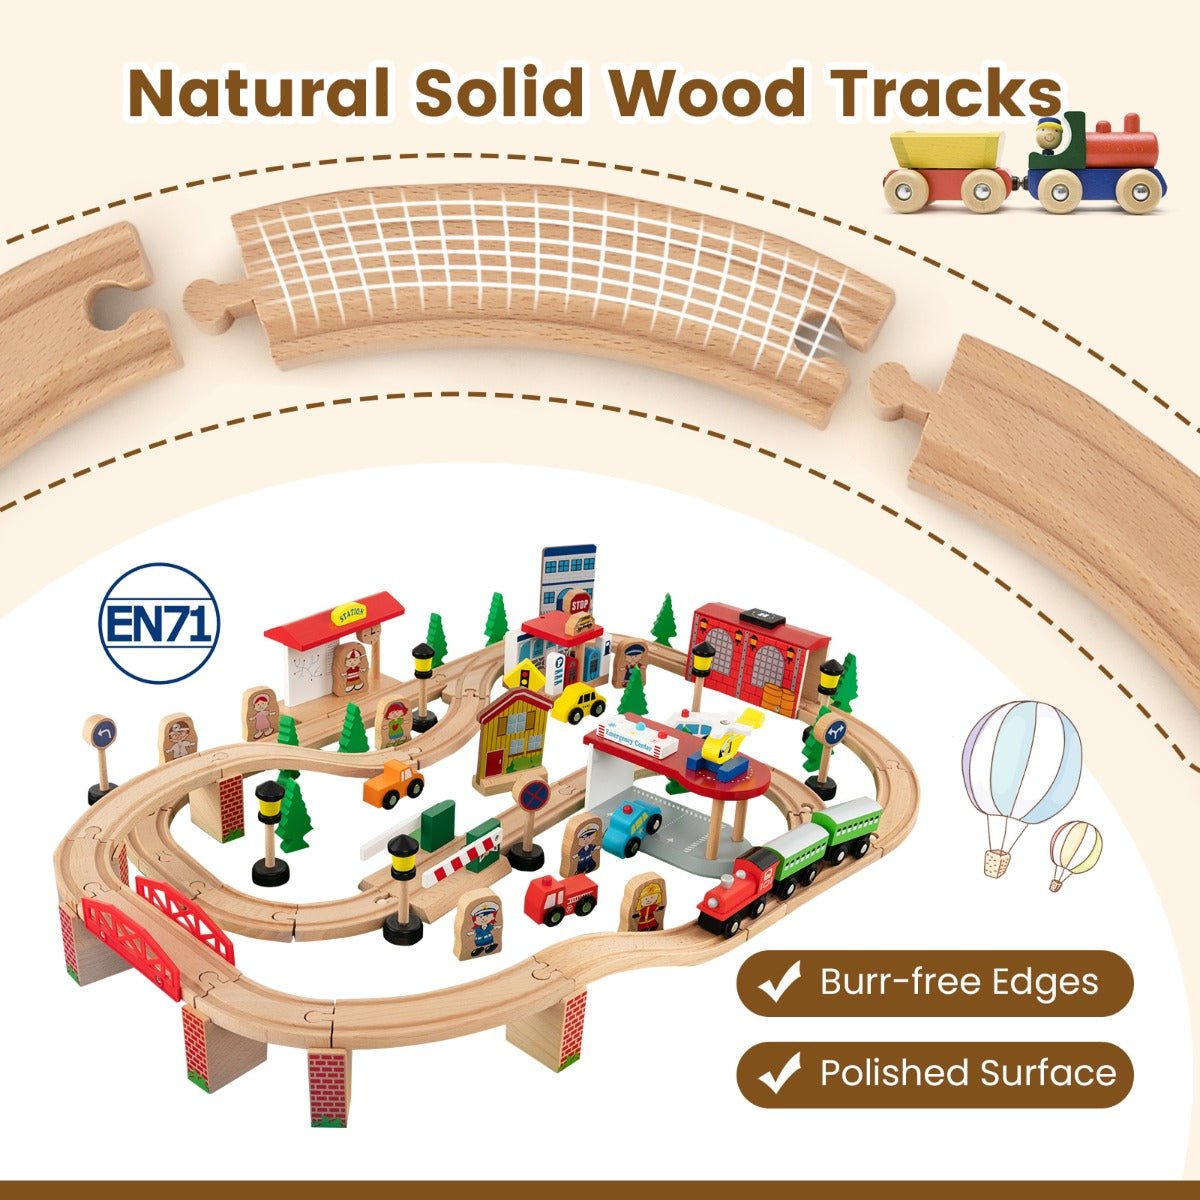 Versatile Play with 84-Piece Train Table in Natural Wood